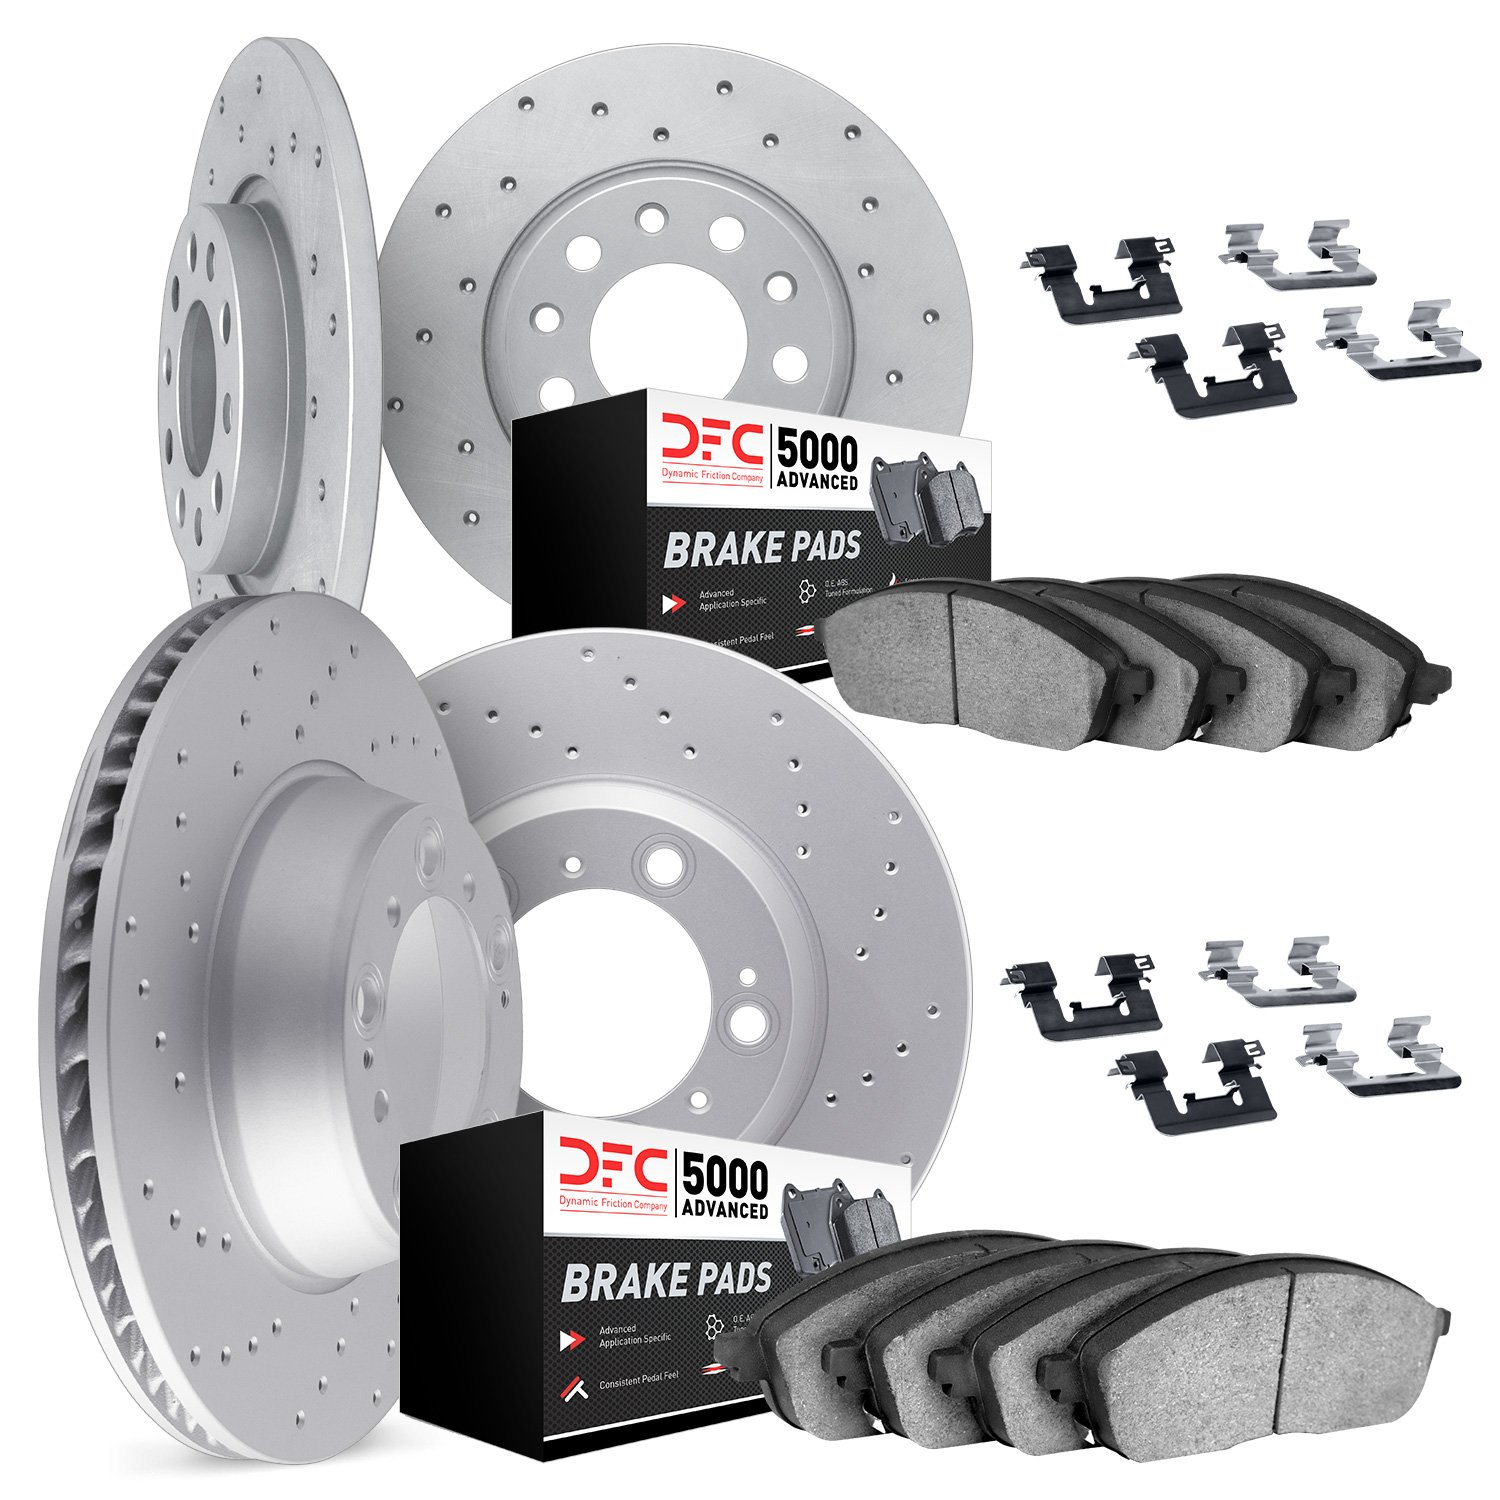 2714-59021 Geoperformance Drilled Brake Rotors with Active Performance Pads Kit & Hardware, 2009-2011 Acura/Honda, Position: Fro